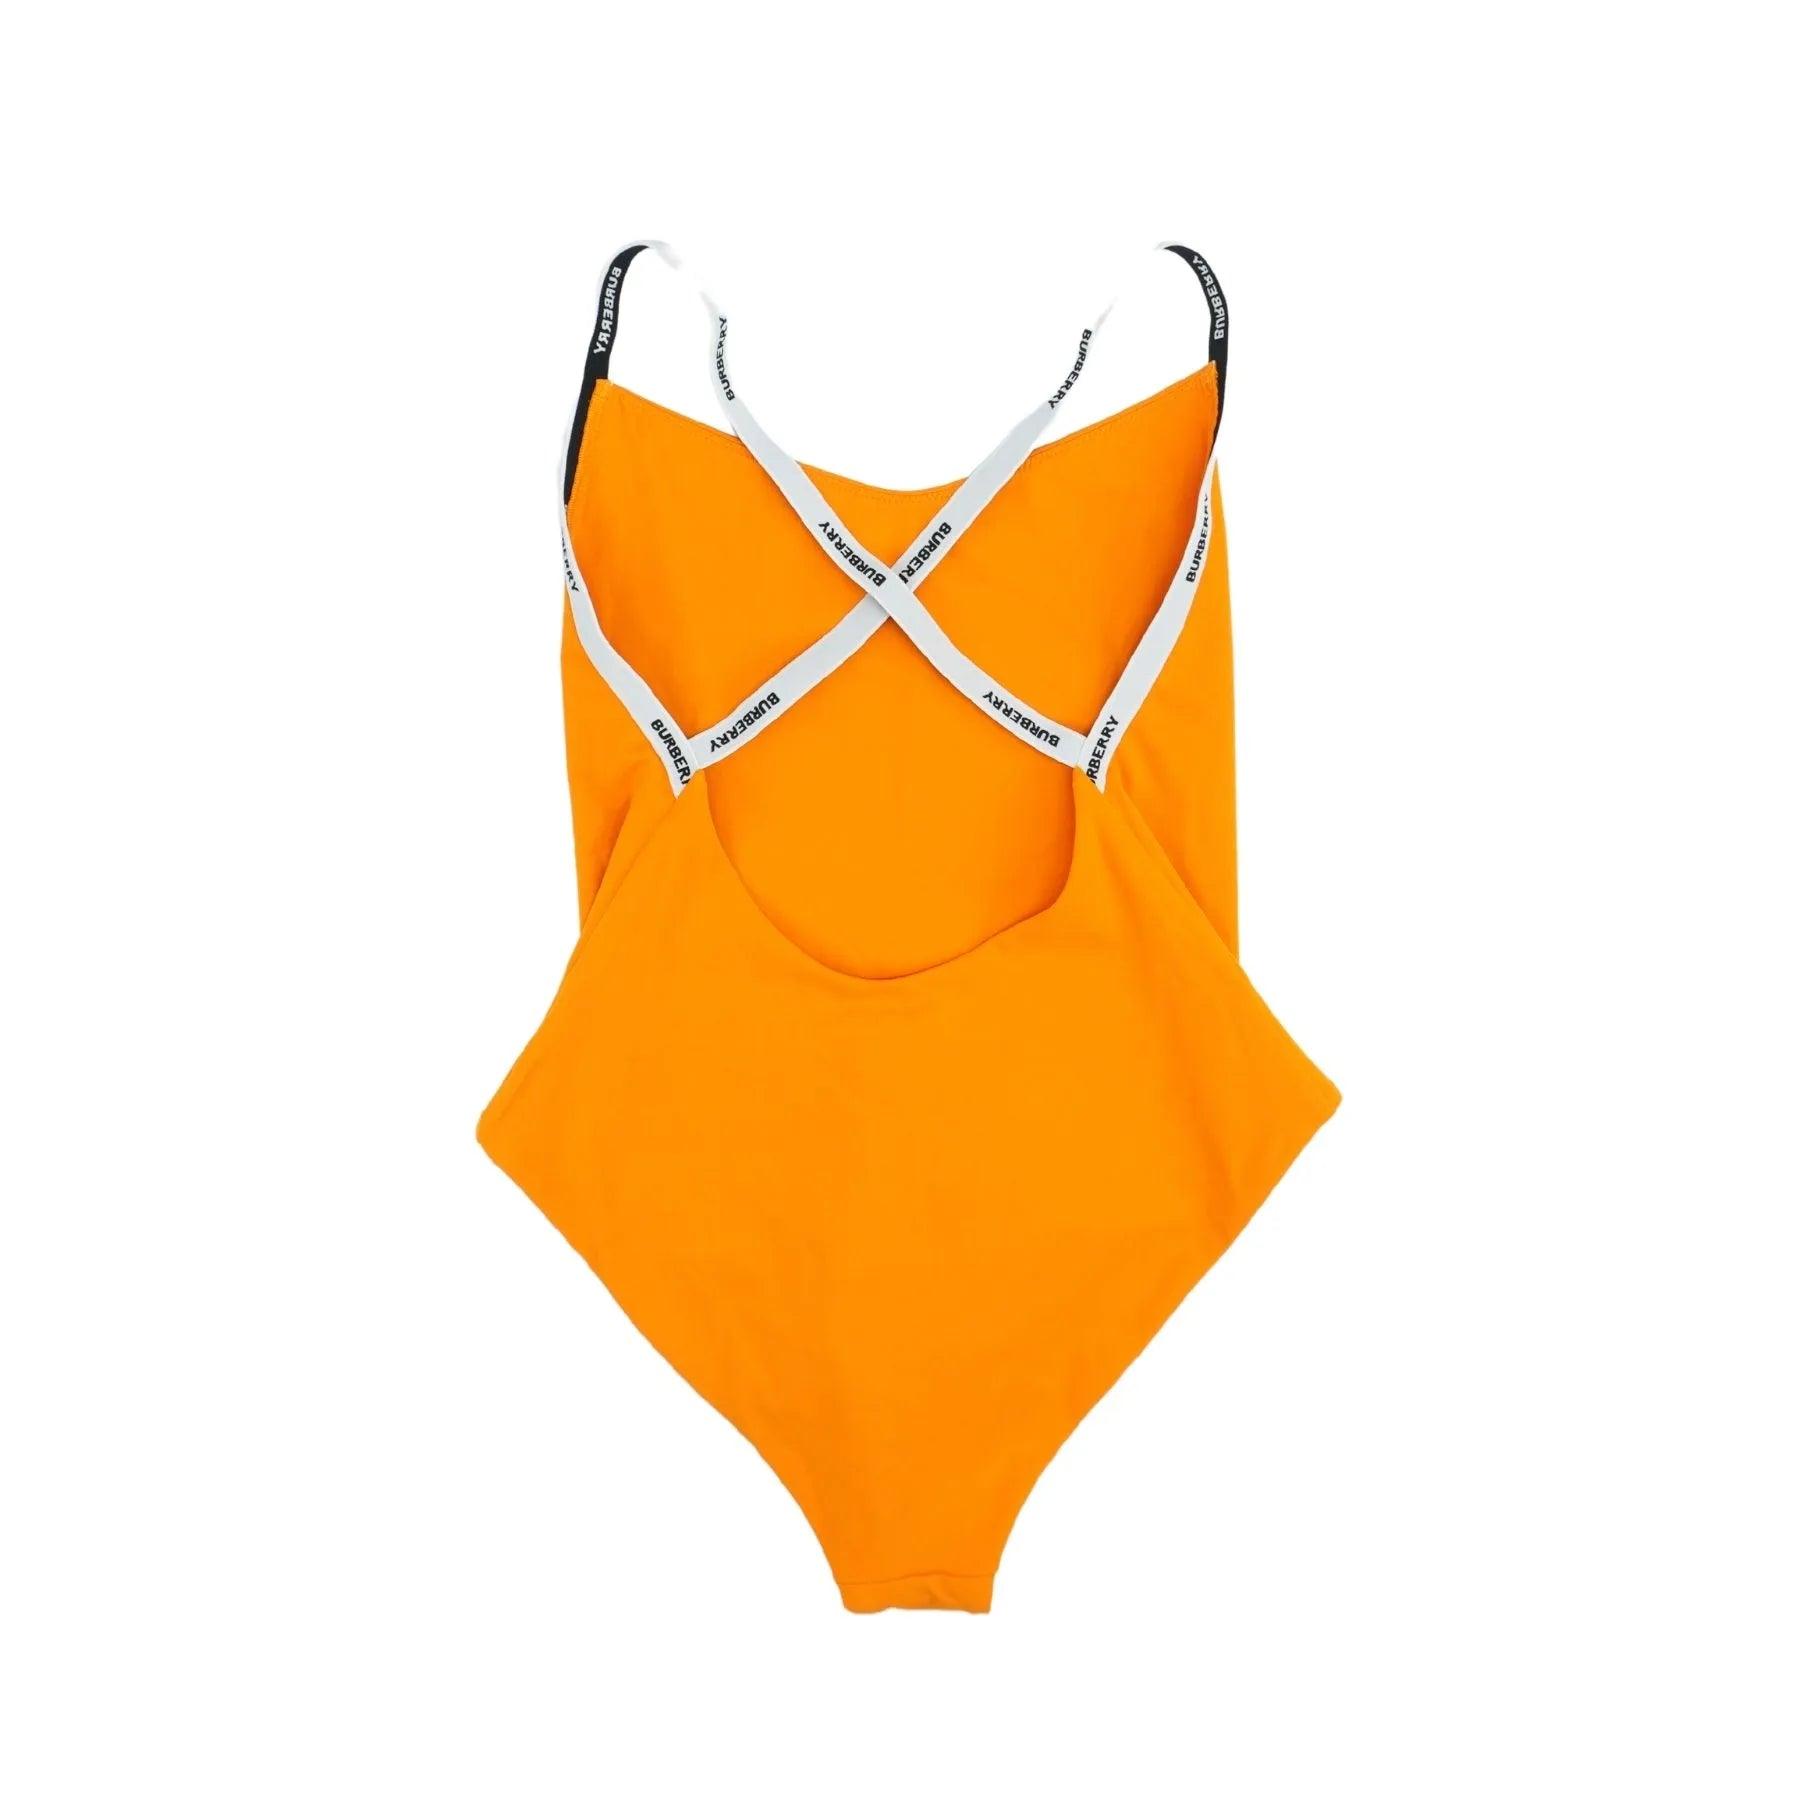 Burberry One-Piece Bathing Suit - Women's L - Fashionably Yours